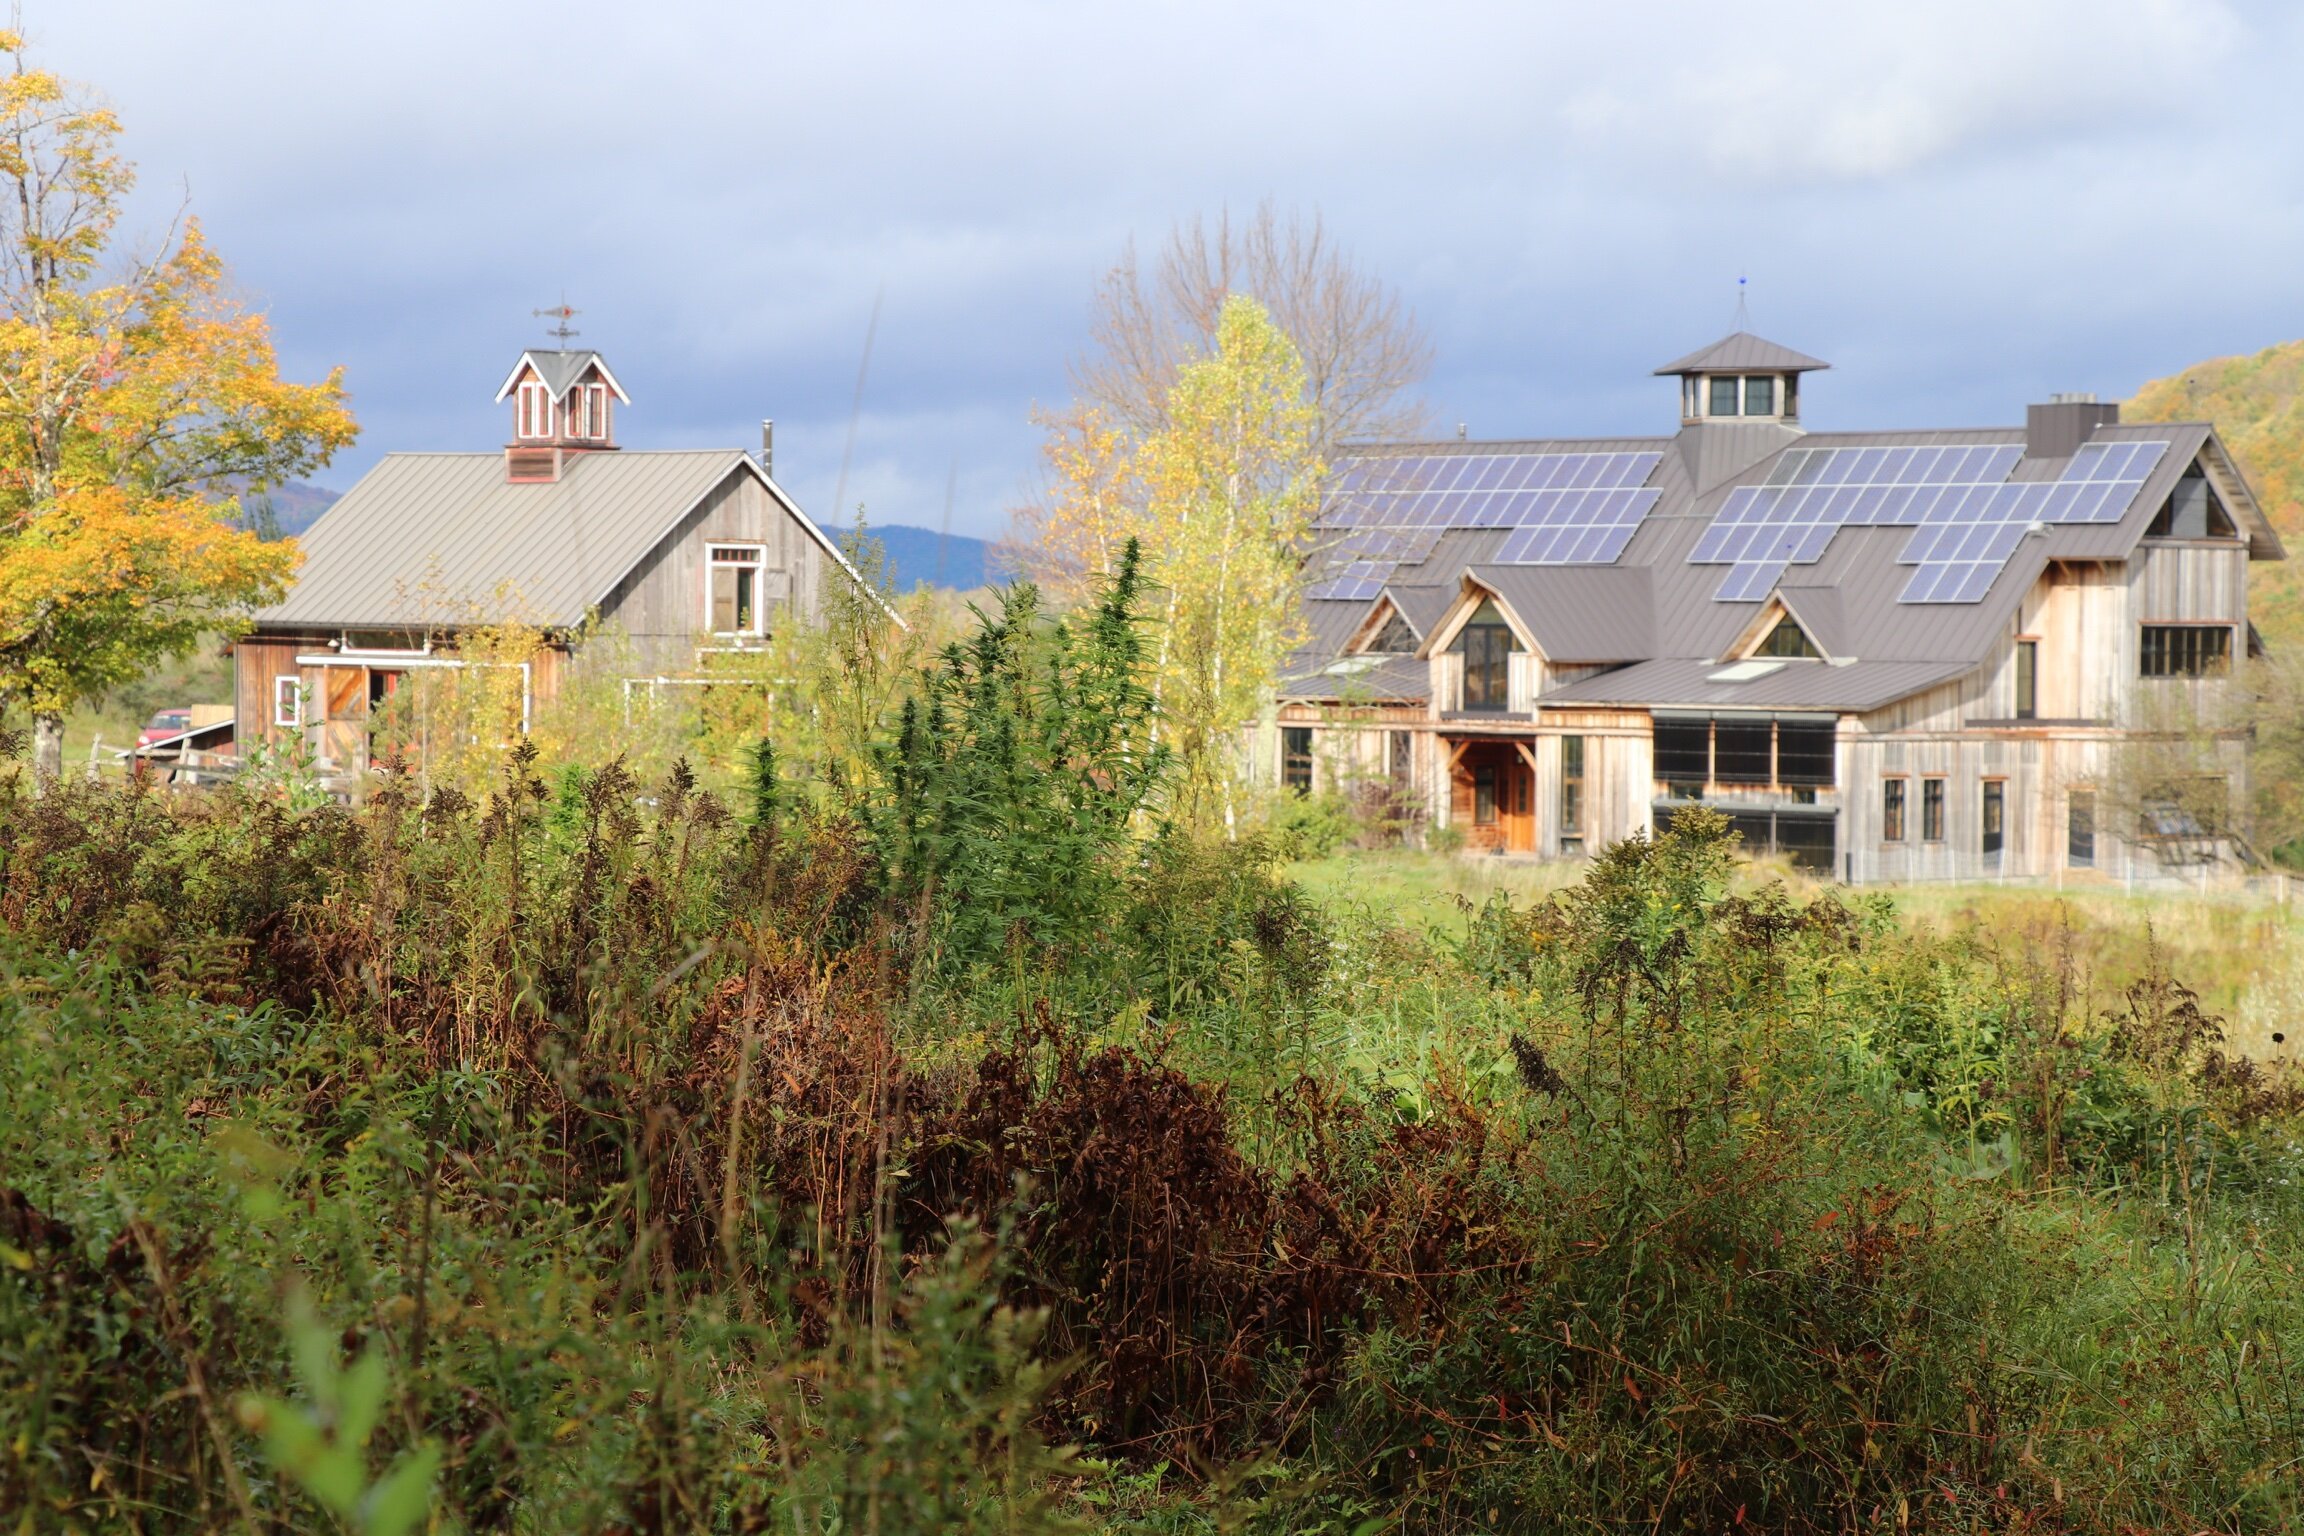 energy barn with solar panels and converted horse barn